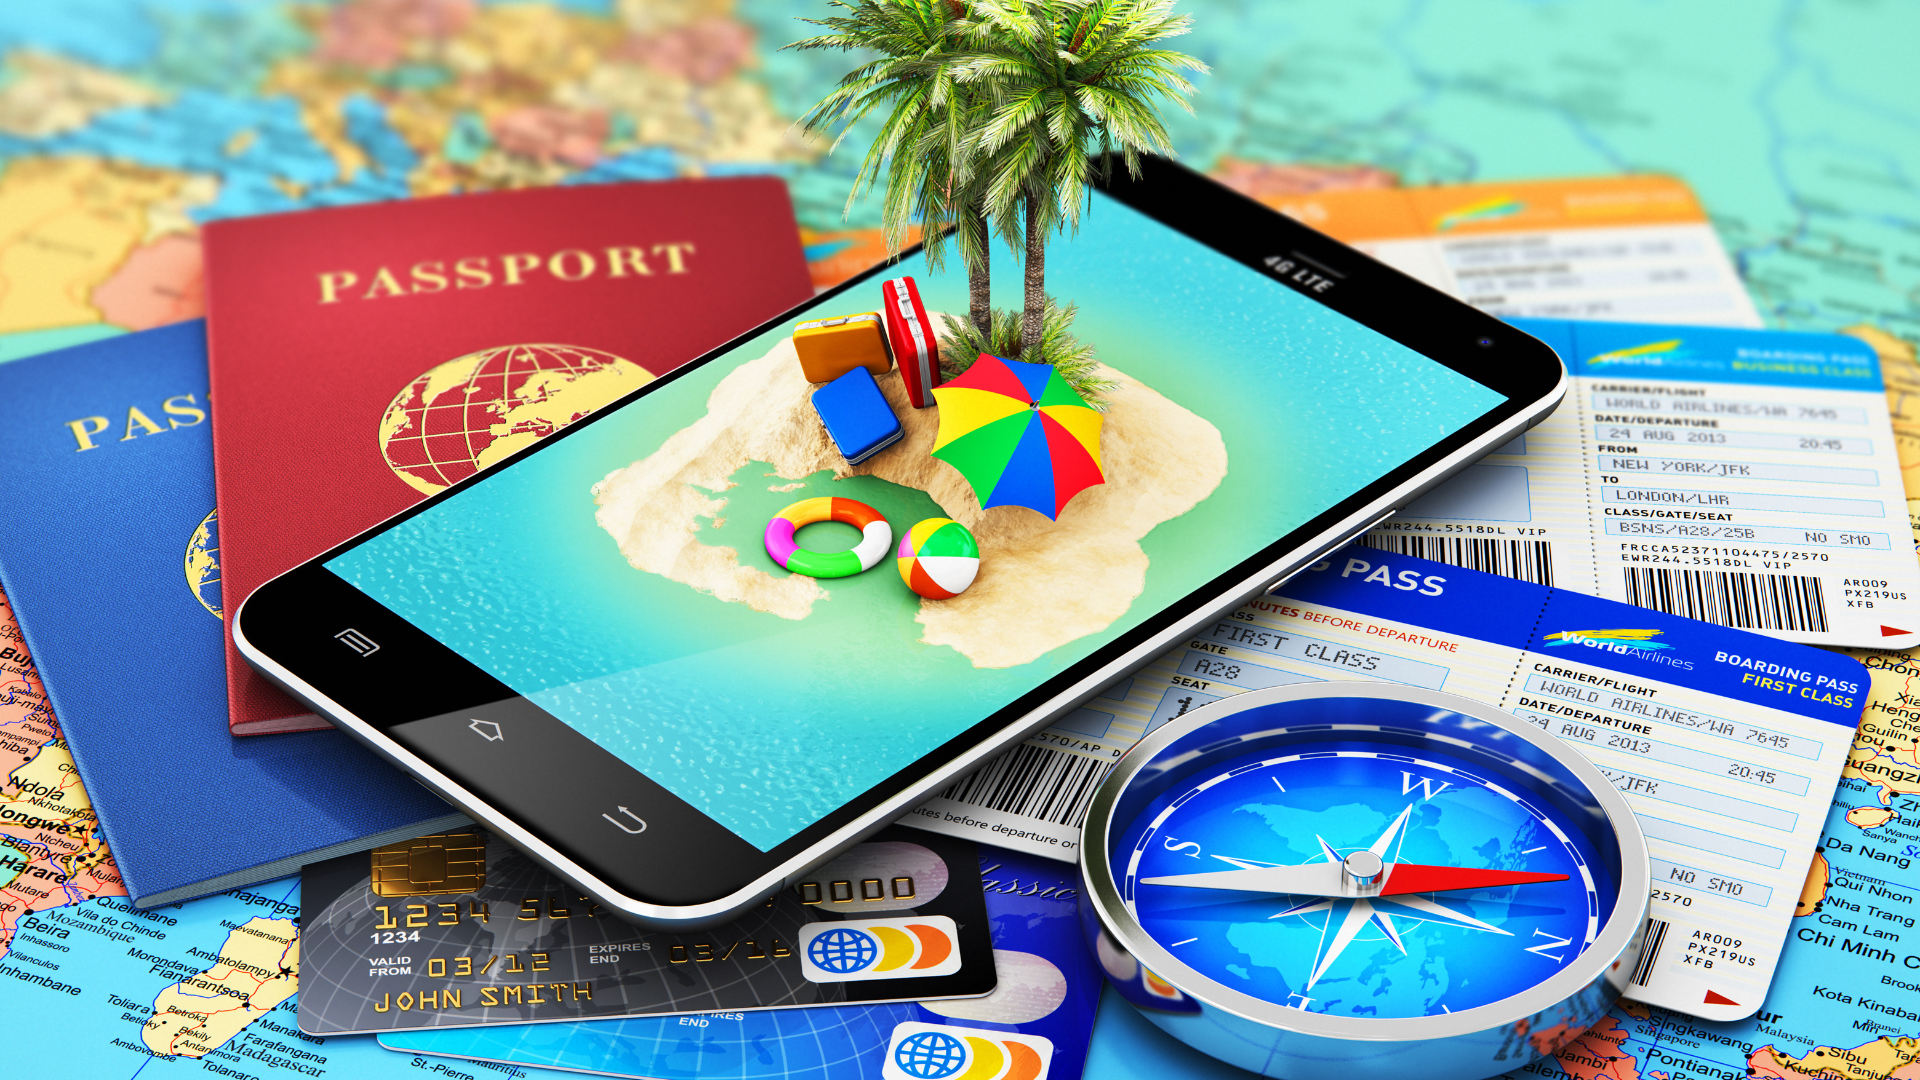 Travel planning on a smartphone with a map, passports, and a compass in the background.